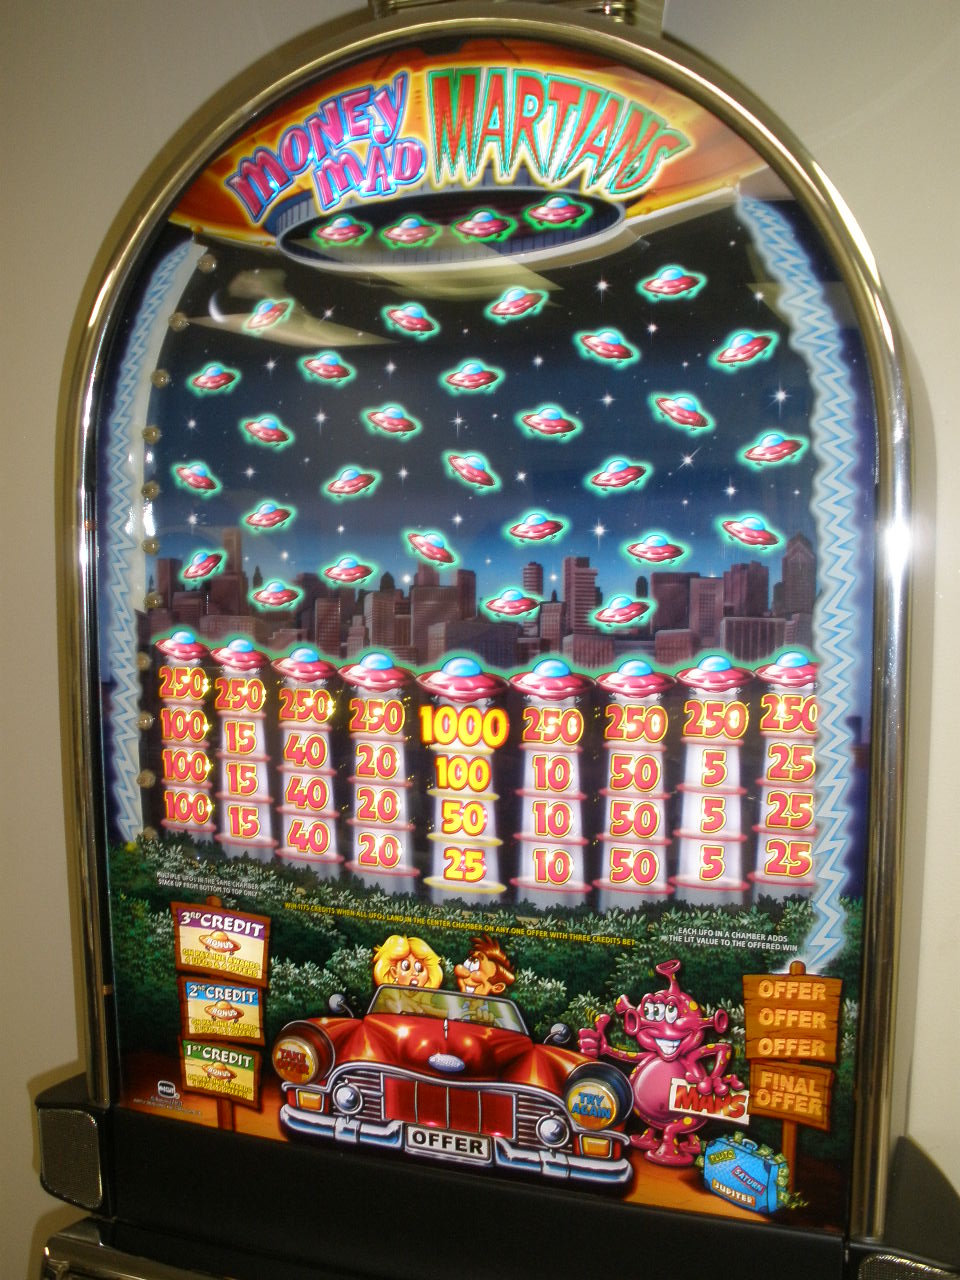 IGT MONEY MAD MARTIANS BARCREST S2000 SLOT MACHINE WITH LIGHTED TOPPER For  Sale • Gambler's Oasis USA